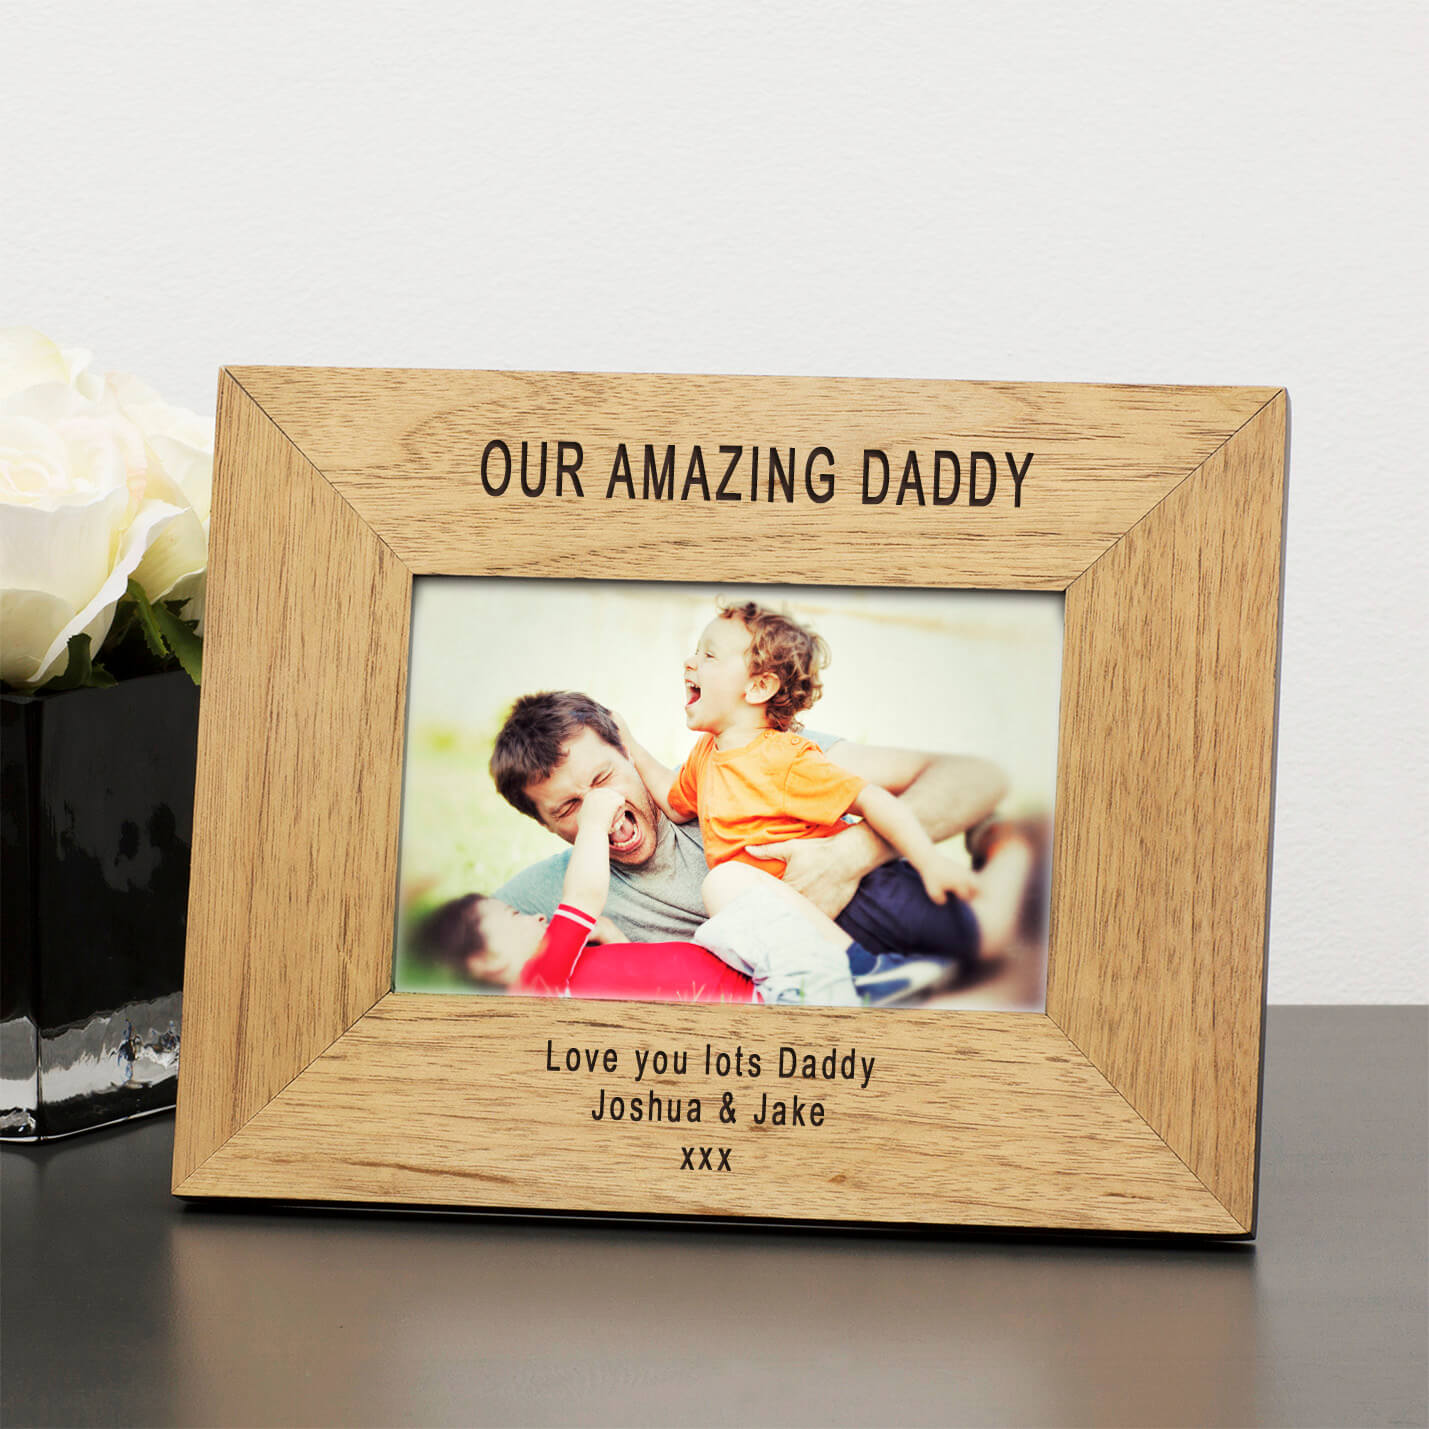 Personalised Wooden Photo Frame – My Amazing Daddy